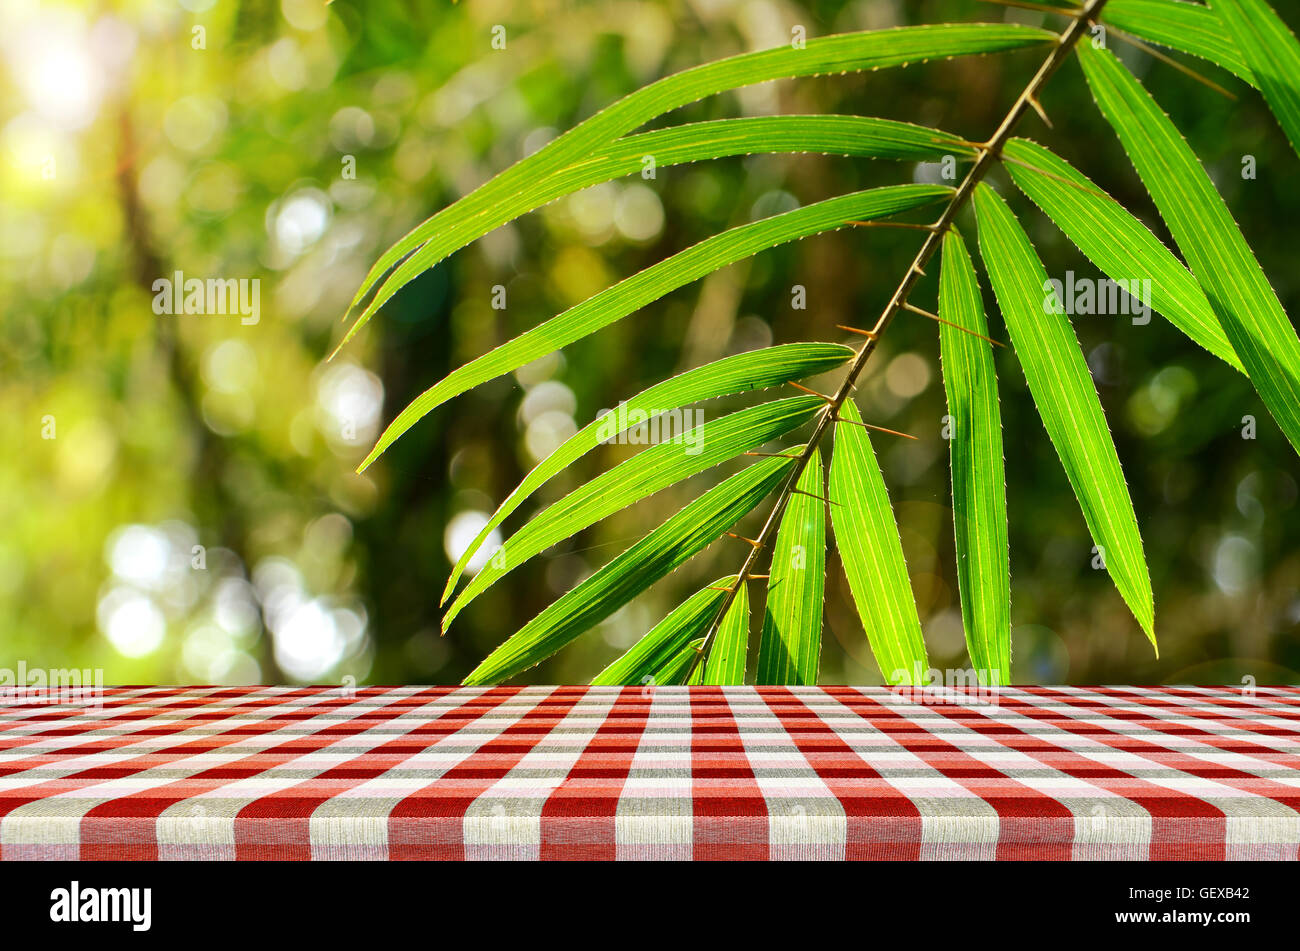 Outdoor picnic background in summer sun light. Stock Photo